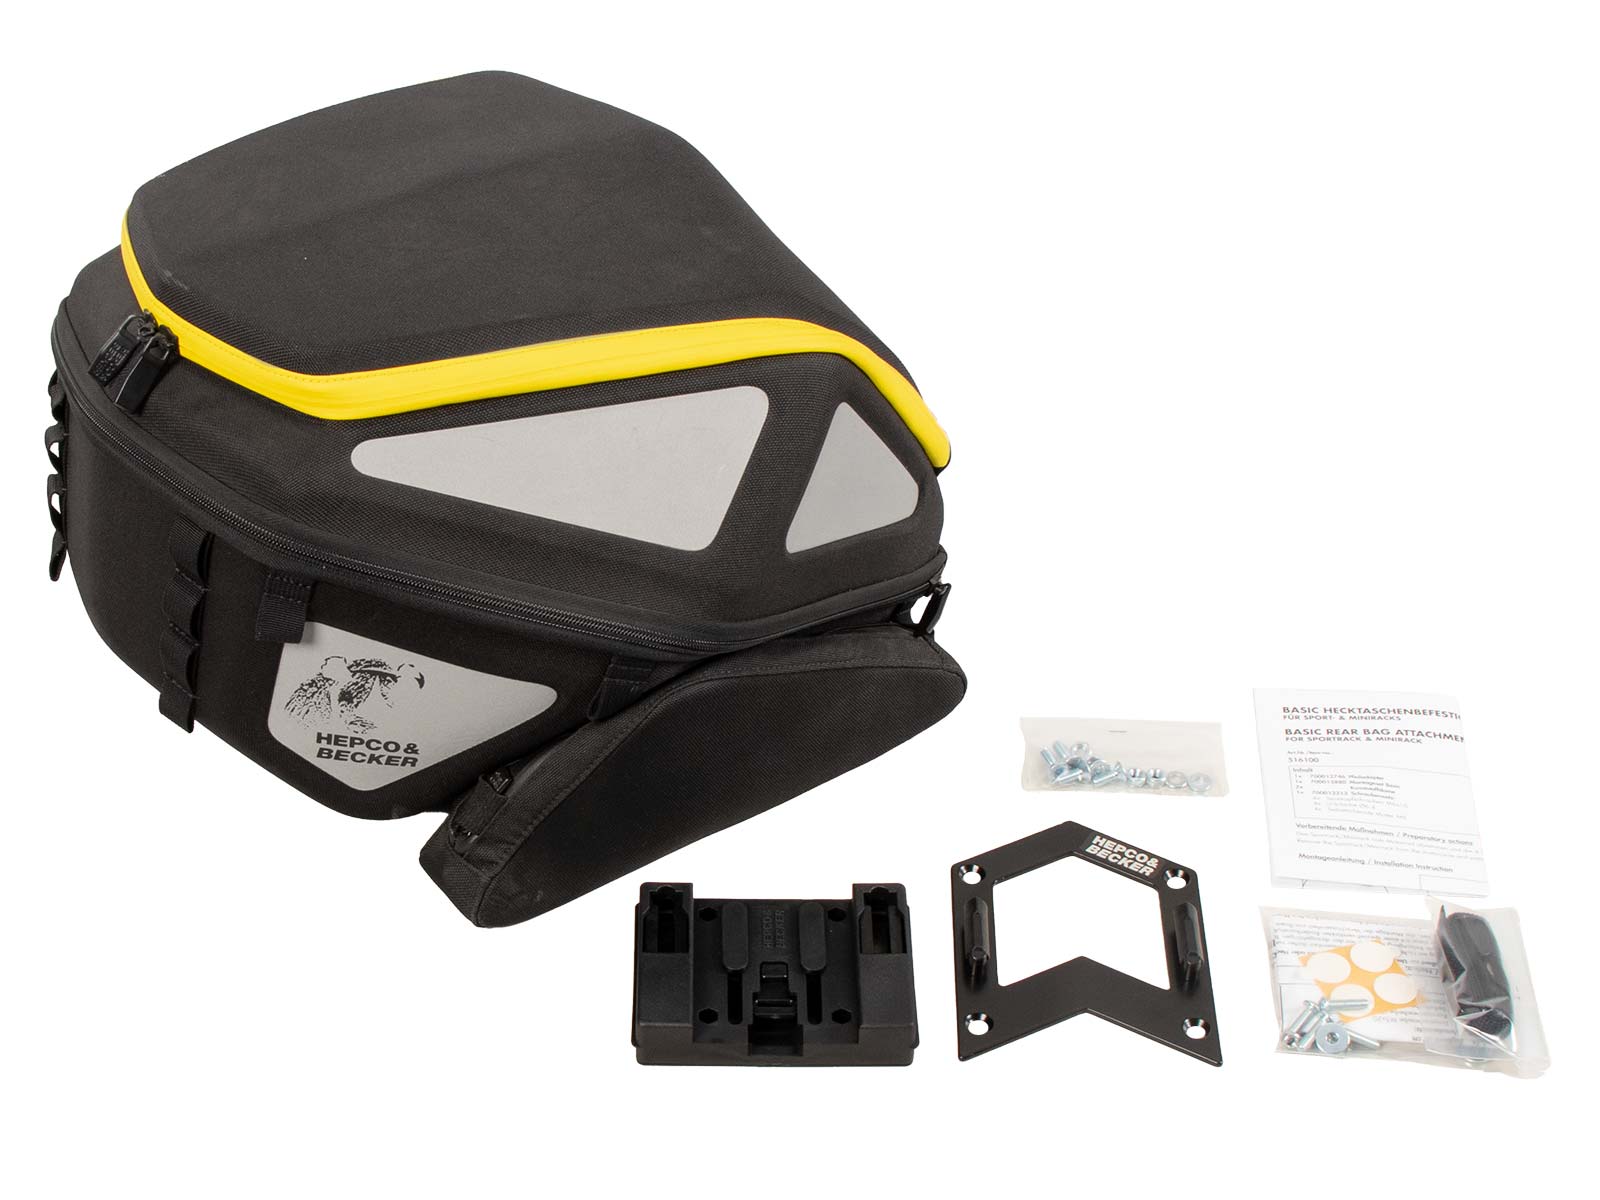 Royster rear bag incl. Basic fastening adapter - black/yellow